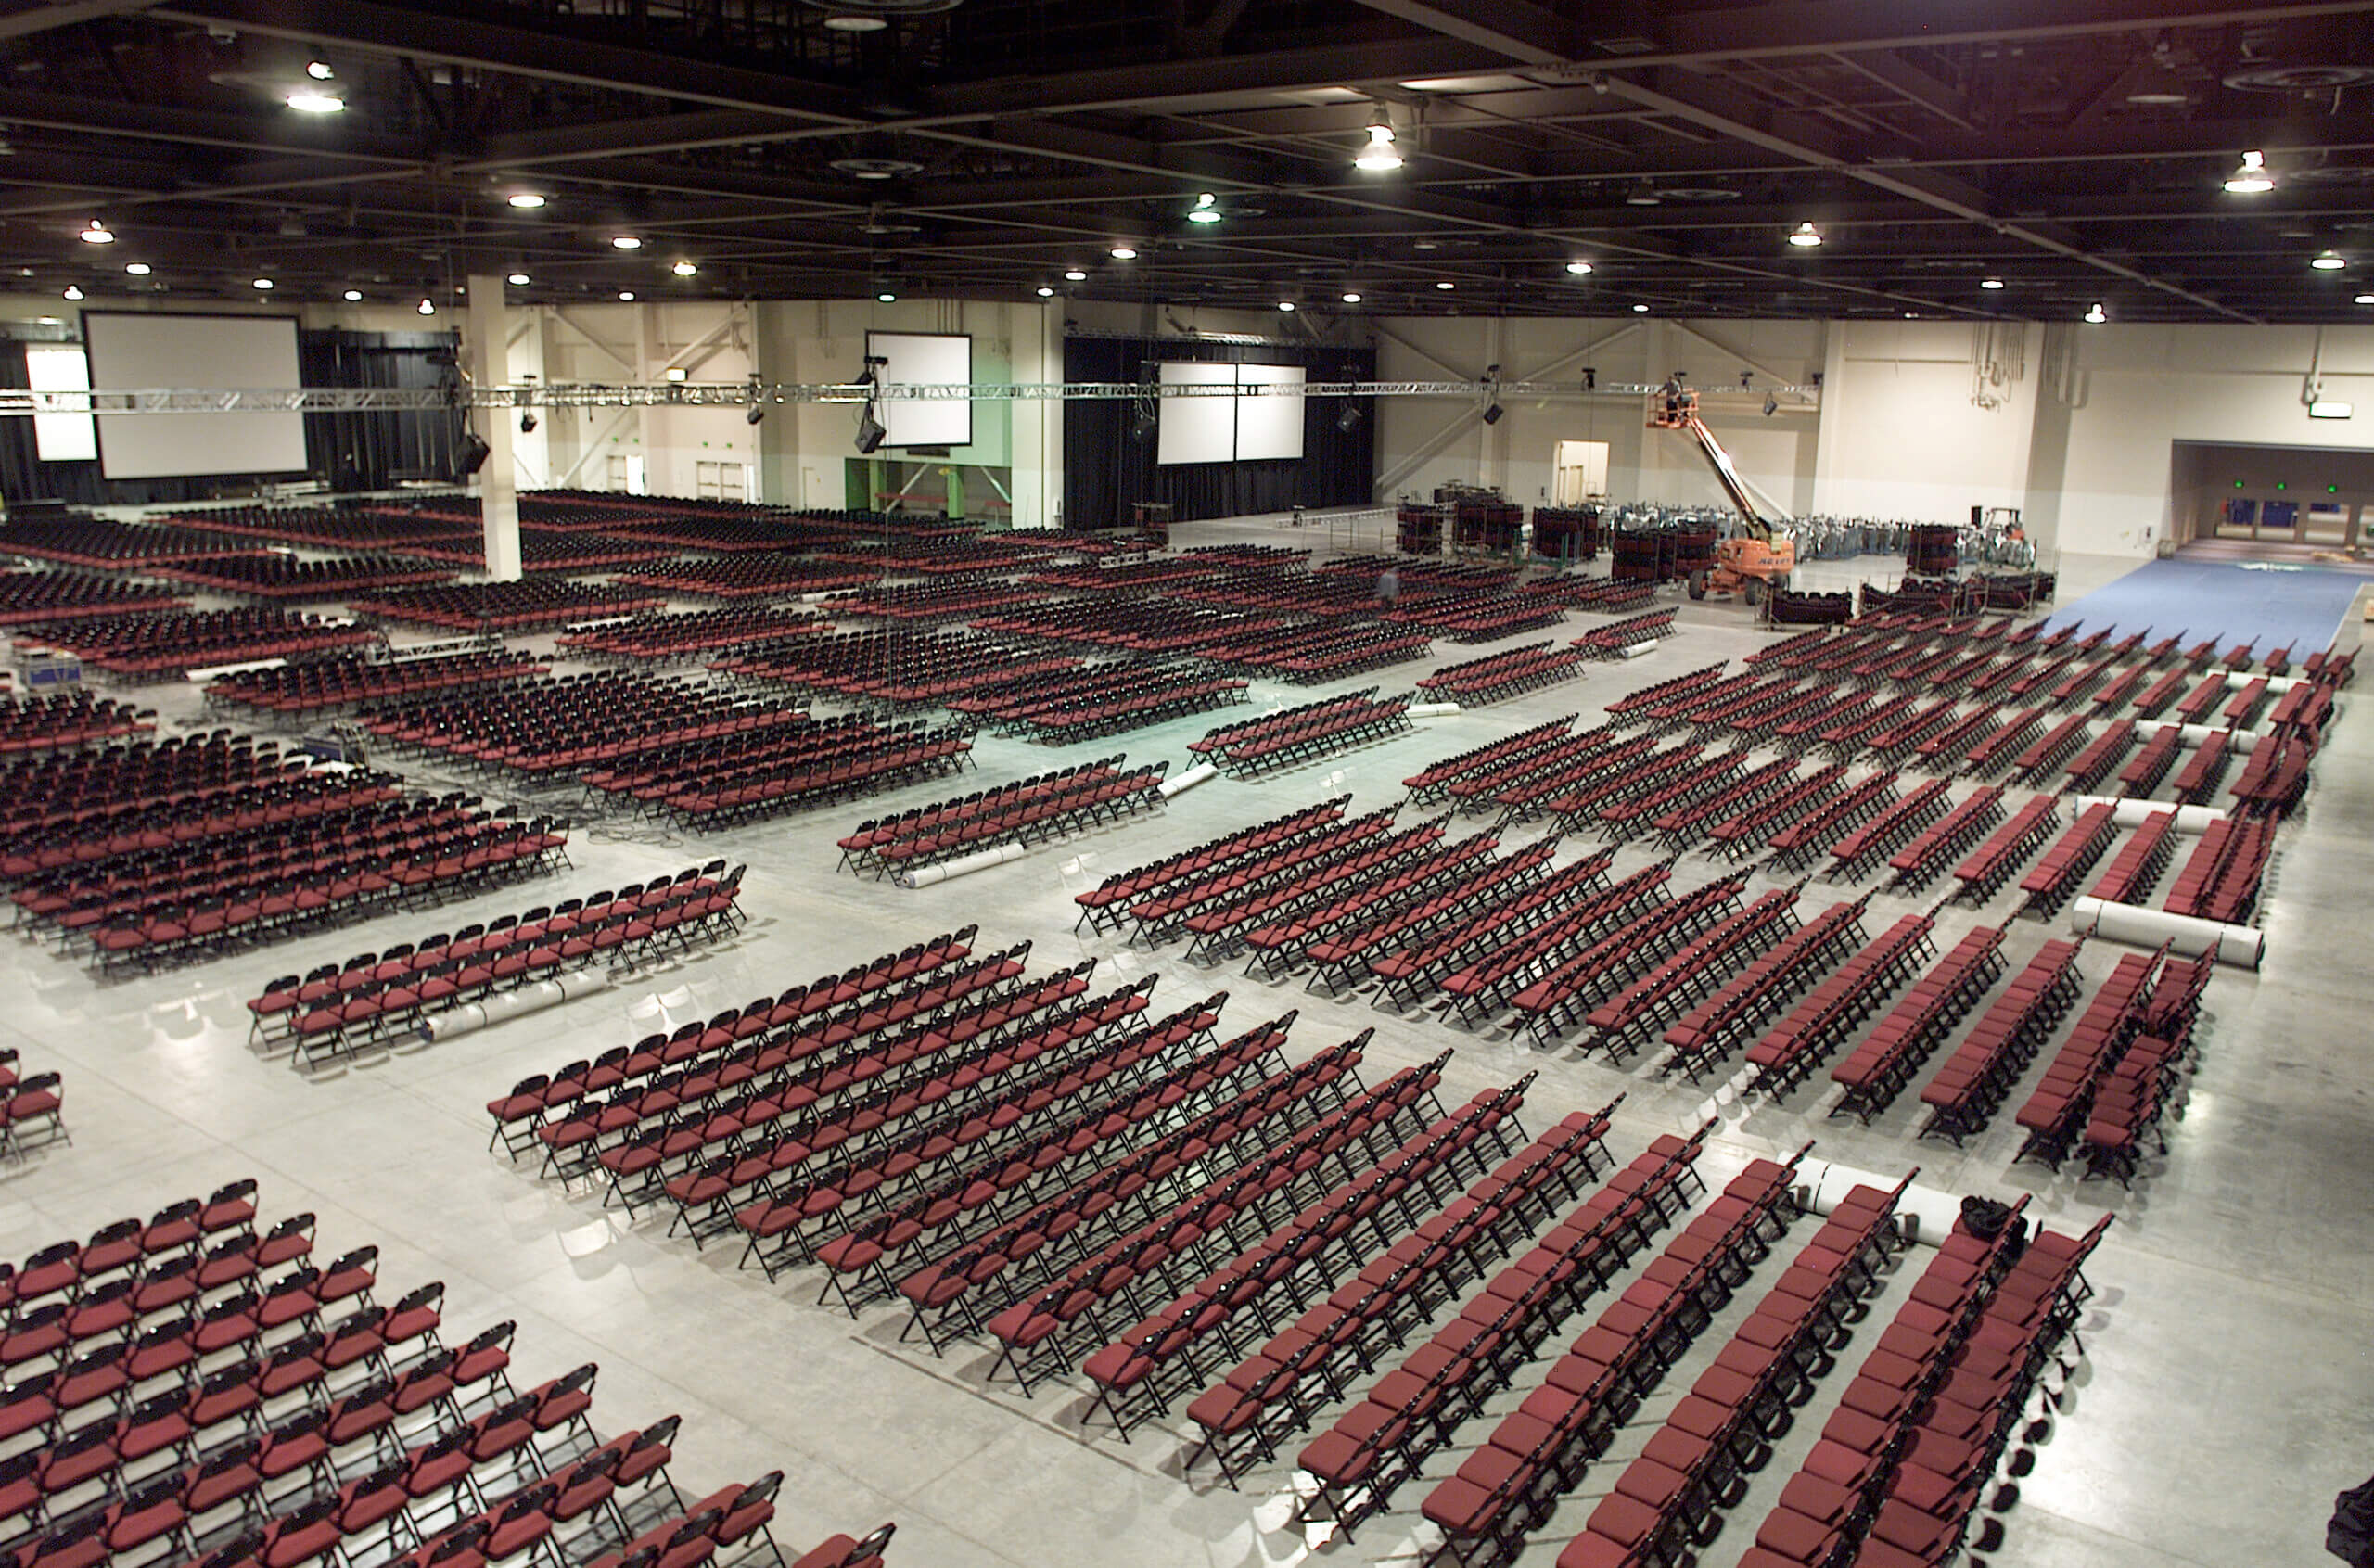 Behind the Scenes at the Reno-Sparks Convention Center